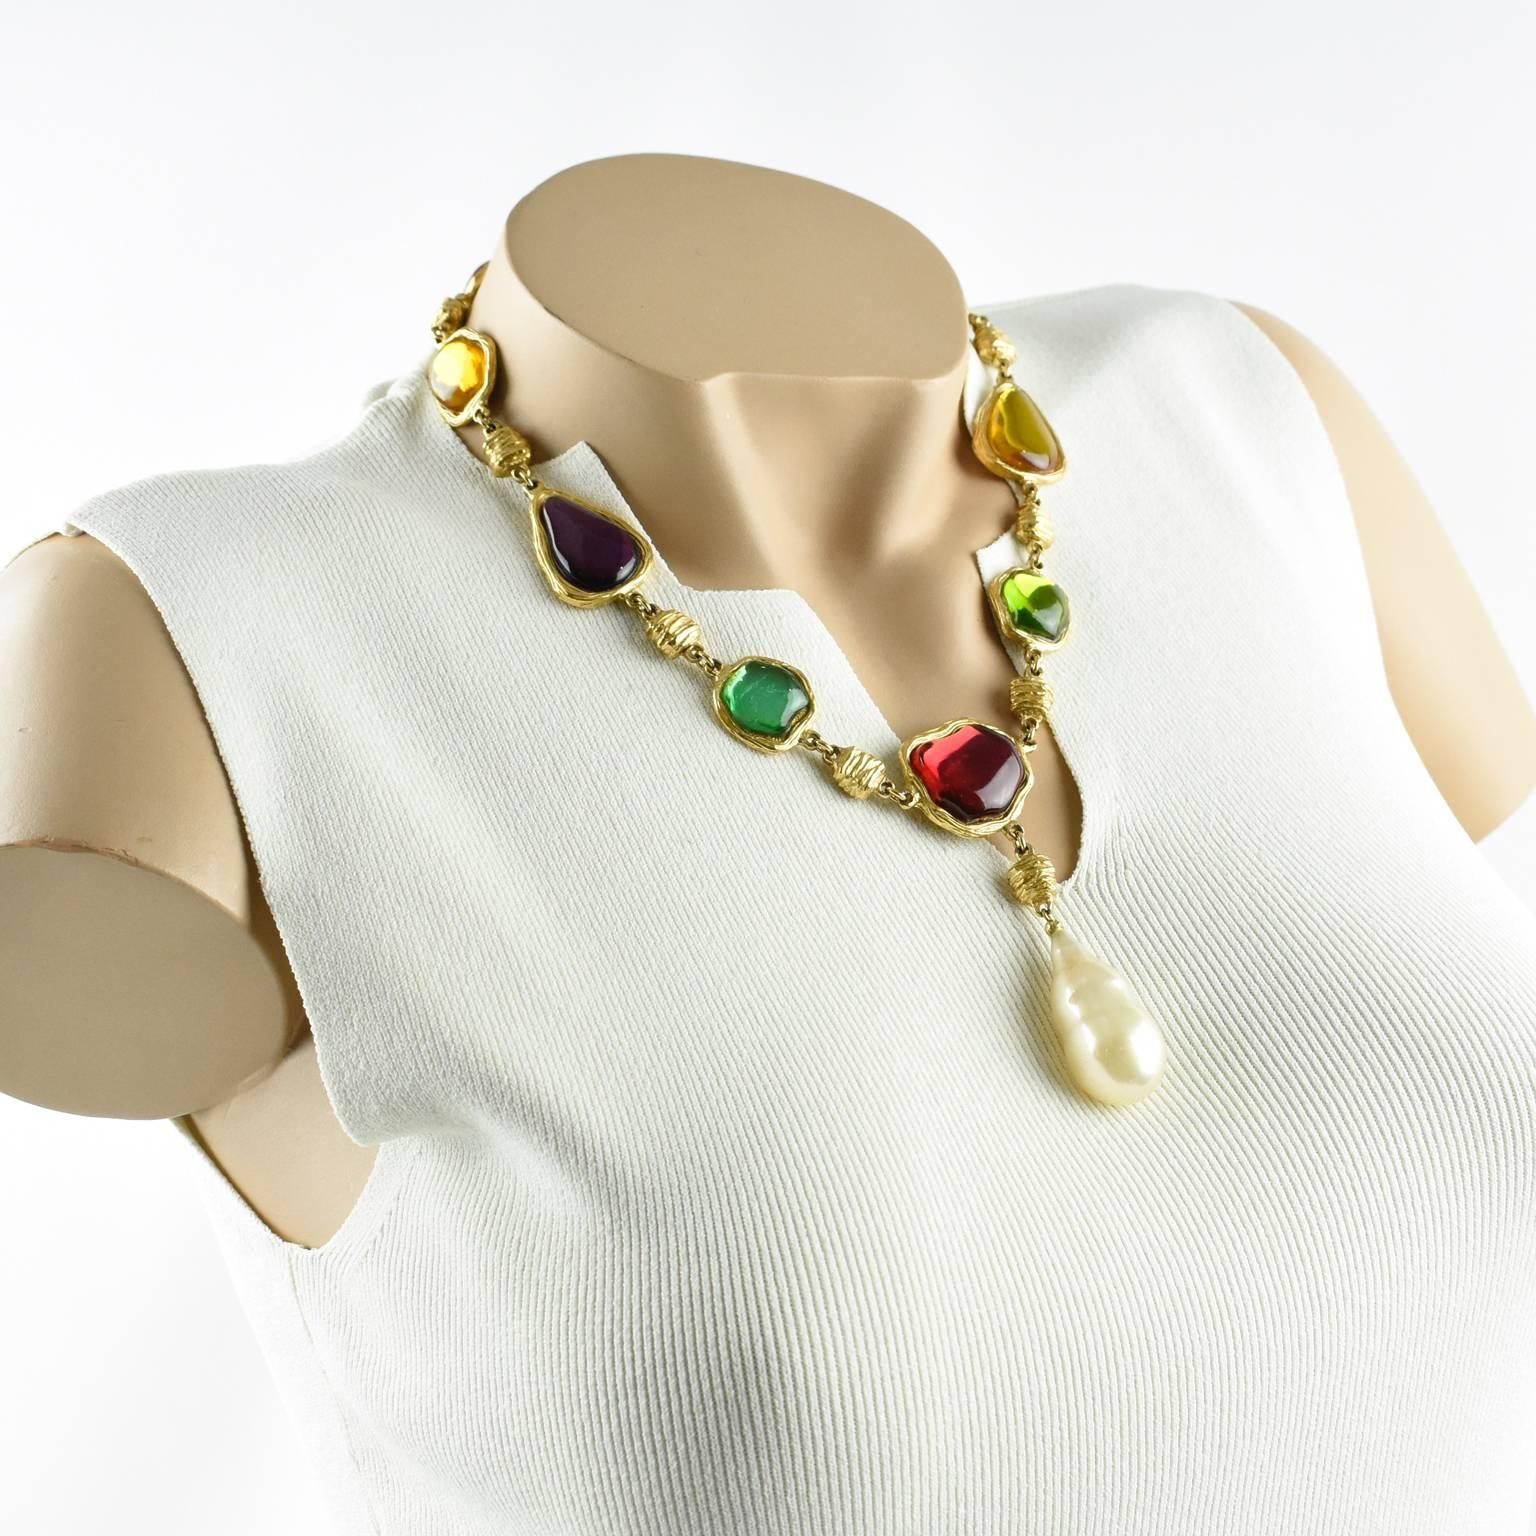 Stunning 1980s Charles Jourdan Paris gilt metal necklace with colored resin cabochon rhinestones. Elegant heavy gilt metal chain with metal all textured ornate with geometric elements topped with resin cabochon rhinestones. Assorted colors of apple